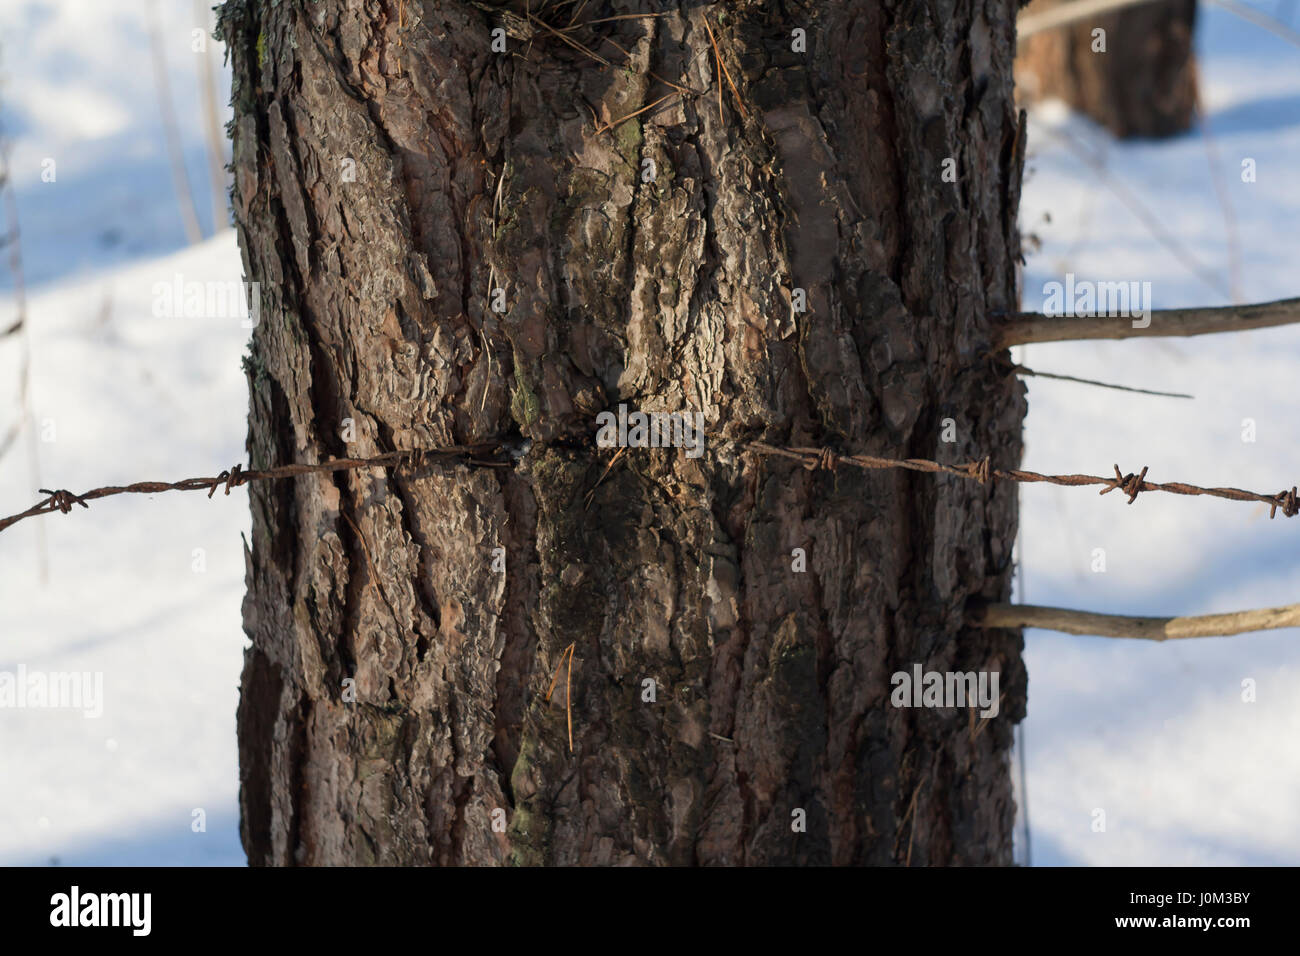 barbed wire ingrown to tree Stock Photo